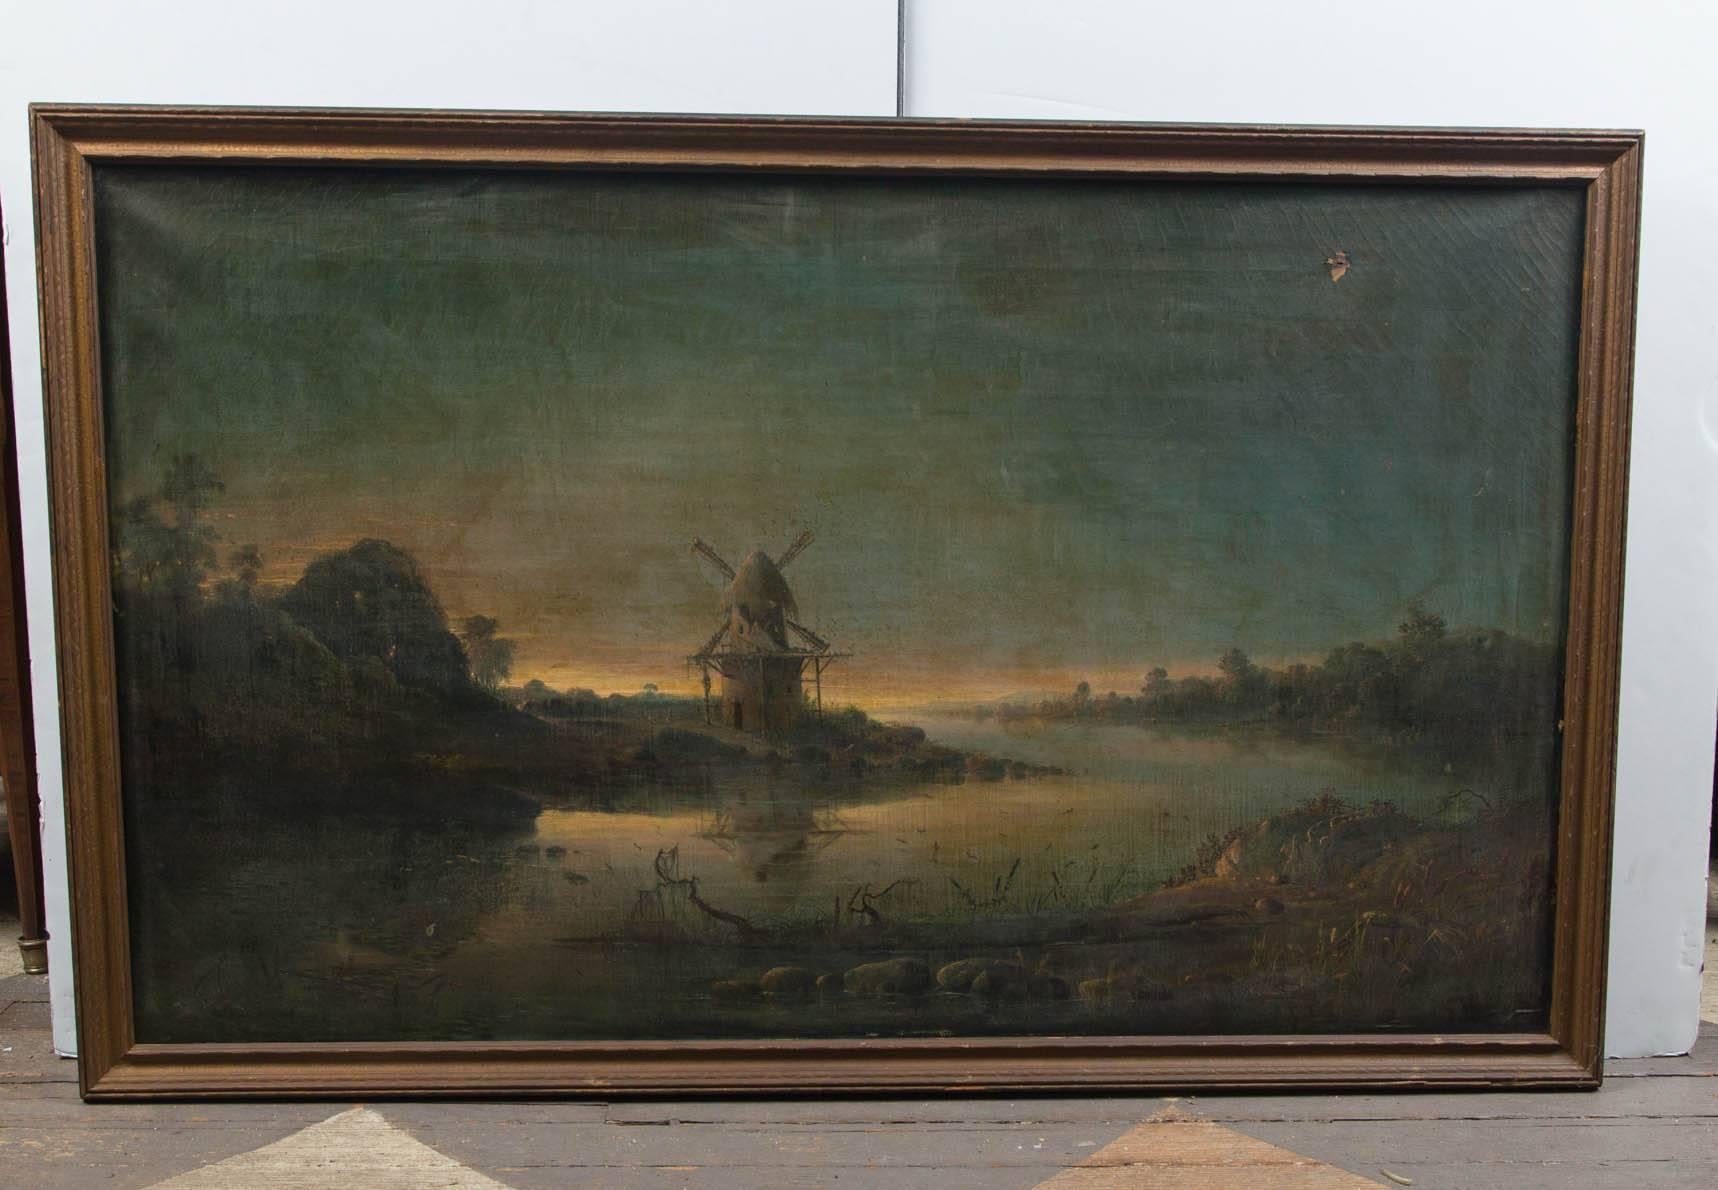 Signed and date G. Harrision, 1869 lower left.
English landscape with a river running past a windmill.
In as found condition. Small hole, upper right. In need of cleaning. Framed.
 